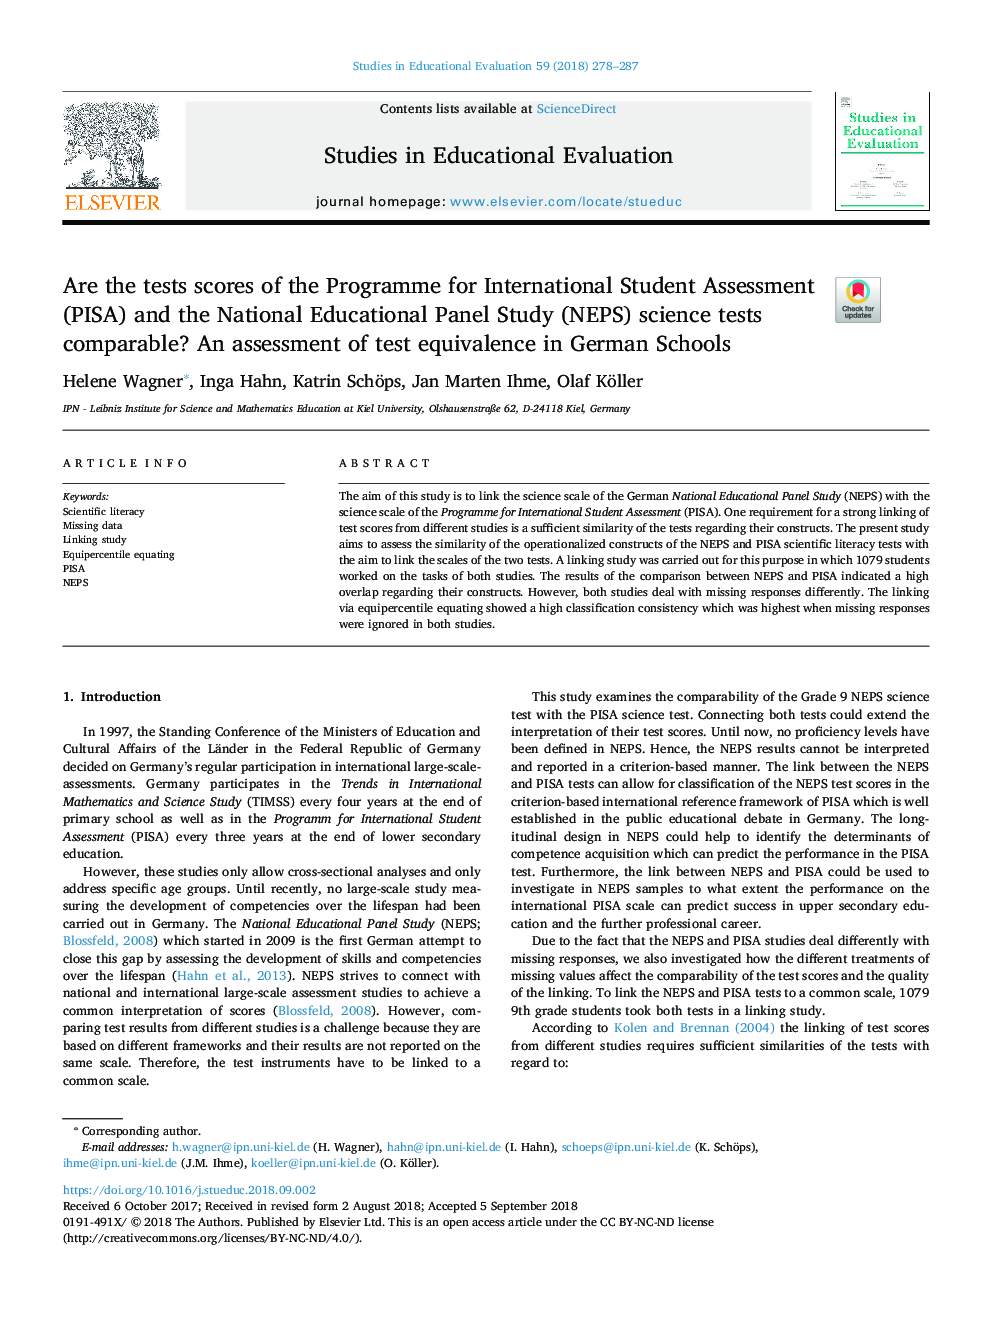 Are the tests scores of the Programme for International Student Assessment (PISA) and the National Educational Panel Study (NEPS) science tests comparable? An assessment of test equivalence in German Schools